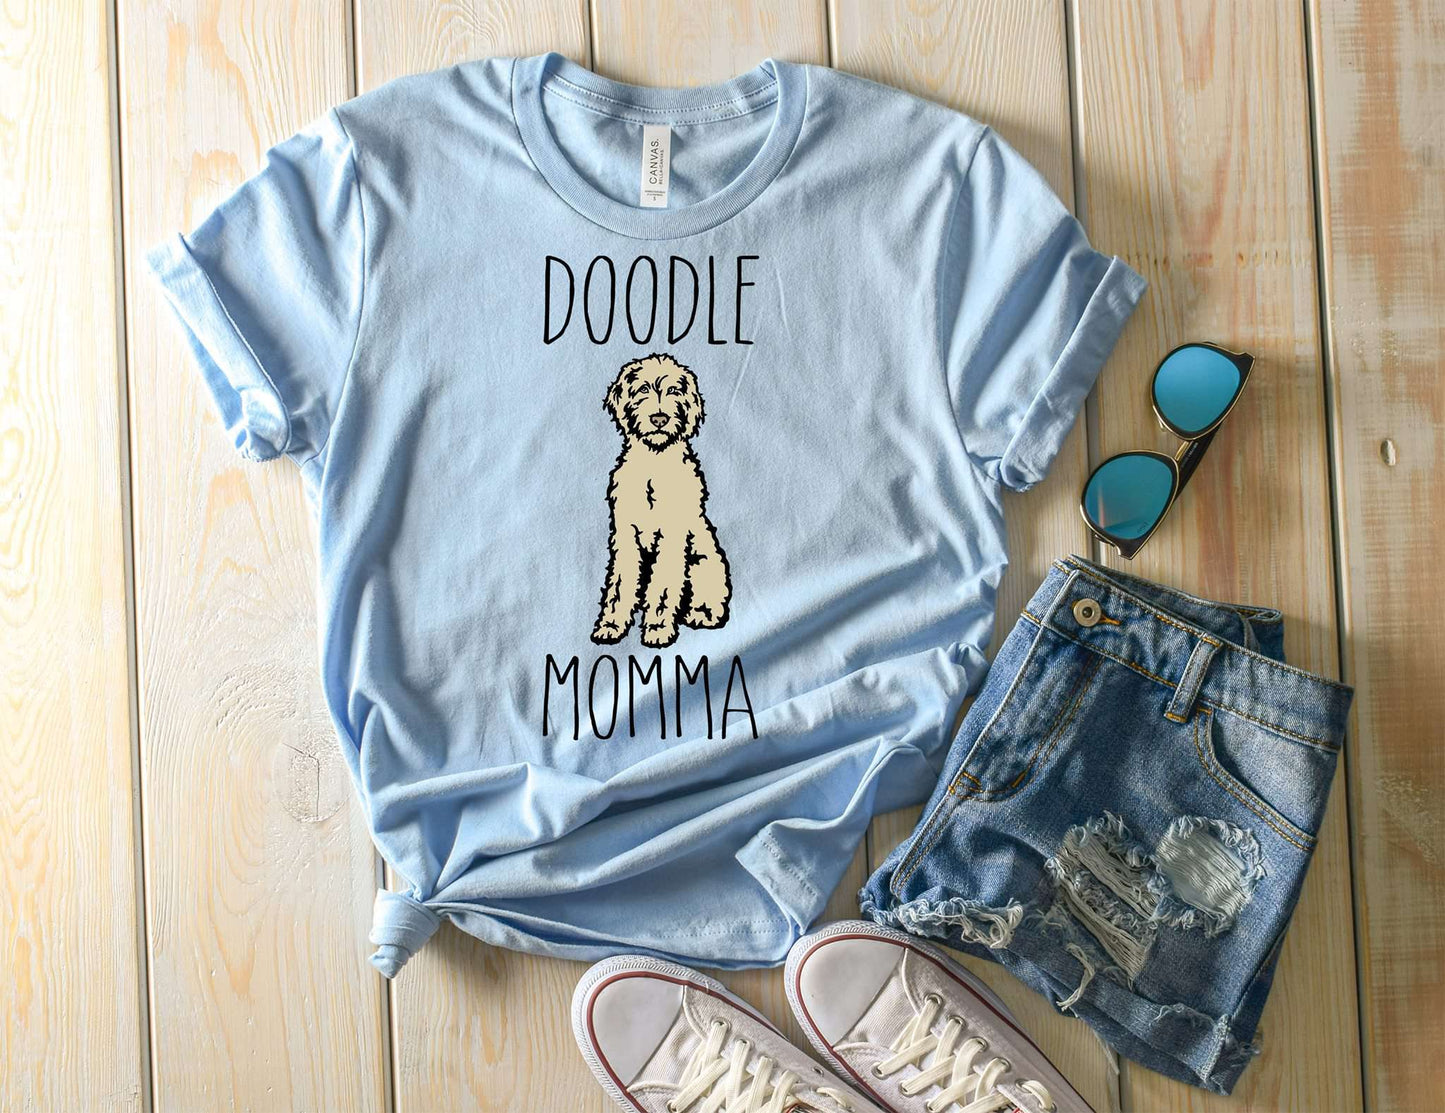 Doodle Momma written on a Doodle Lover T-Shirt